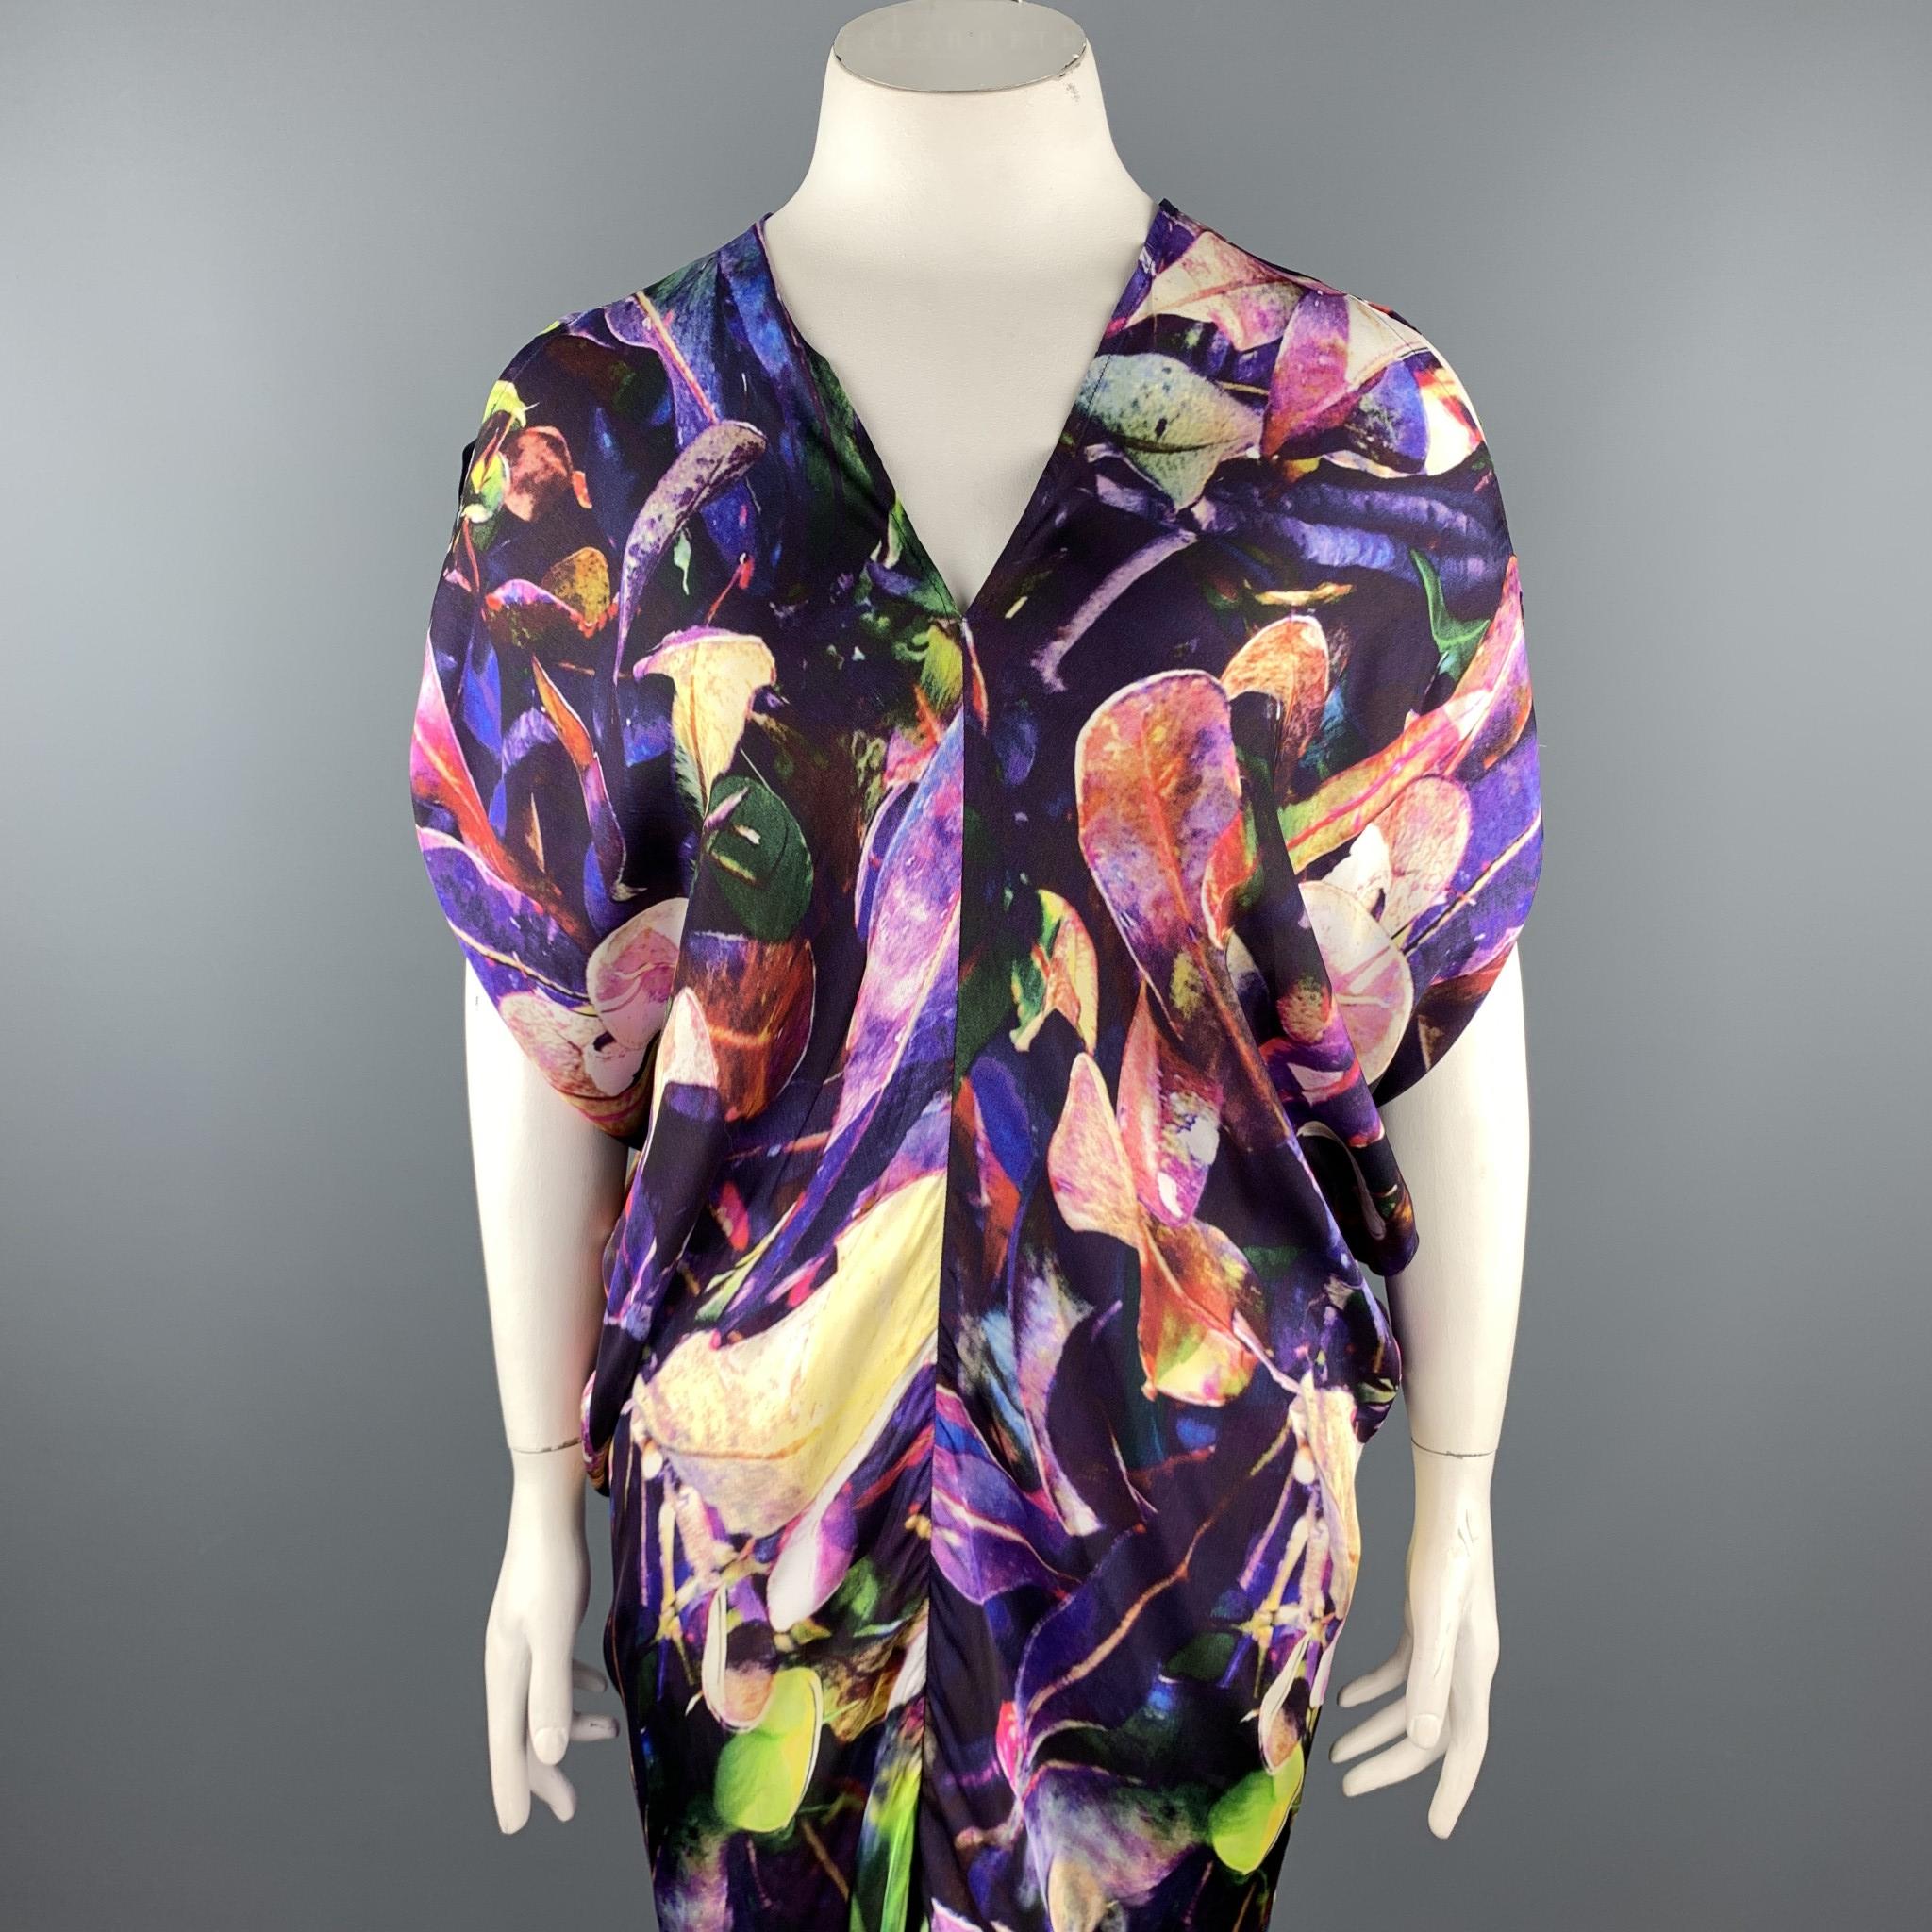 ZERO + MARIA CORNEJO tunic dress comes in purple floral satin twill with an oversized drape silhouette, v neck, could shoulder and pleated front. Made in USA.  Retail $995.00

Excellent Pre-Owned Condition.
Marked: US 10

Measurements:

Shoulder: 14